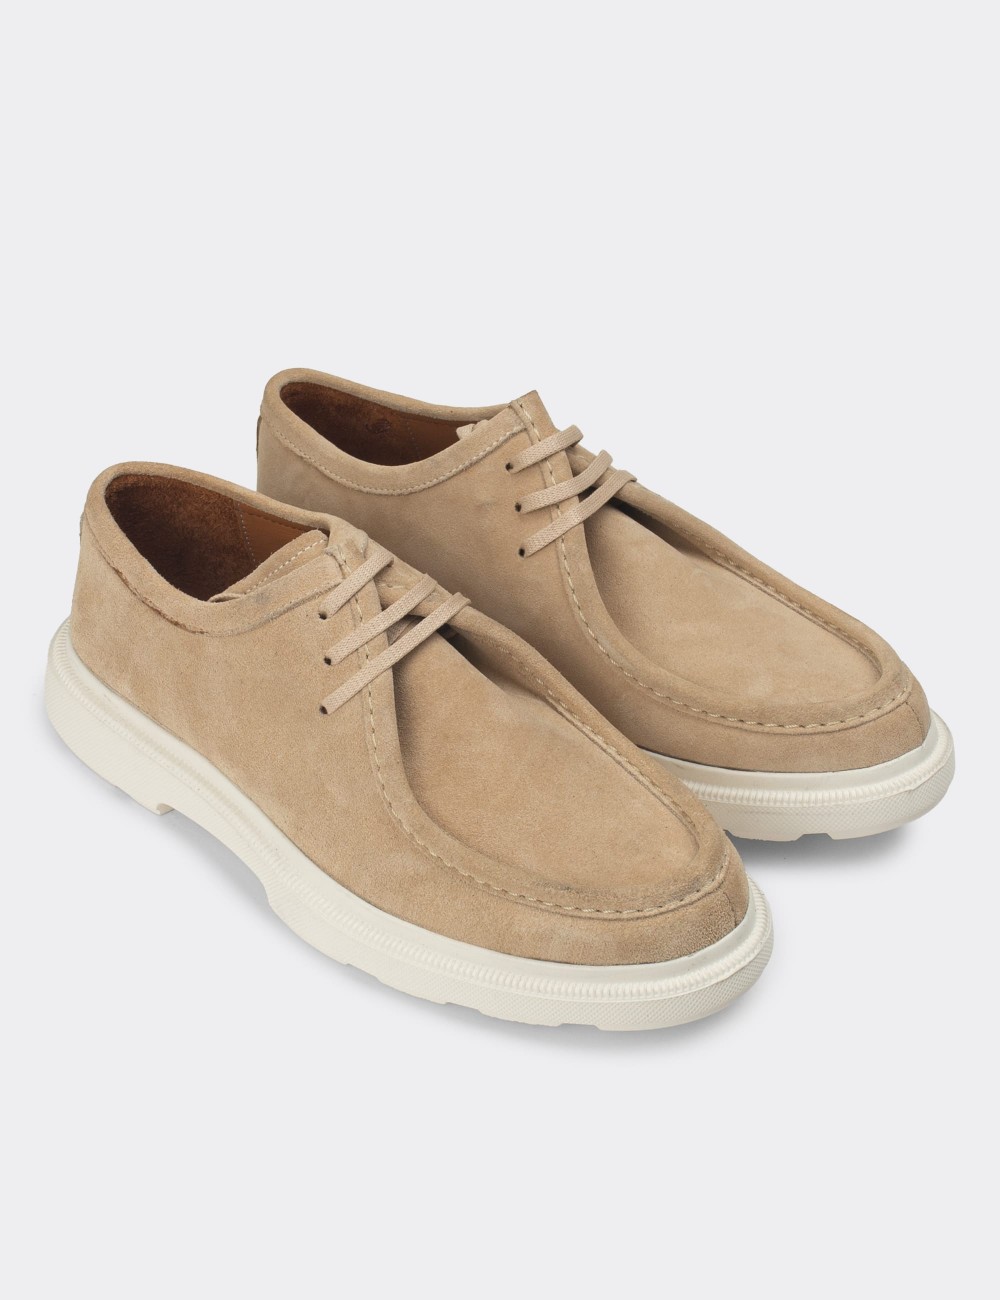 Beige Suede Leather Lace-up Shoes - 01851MBEJP01